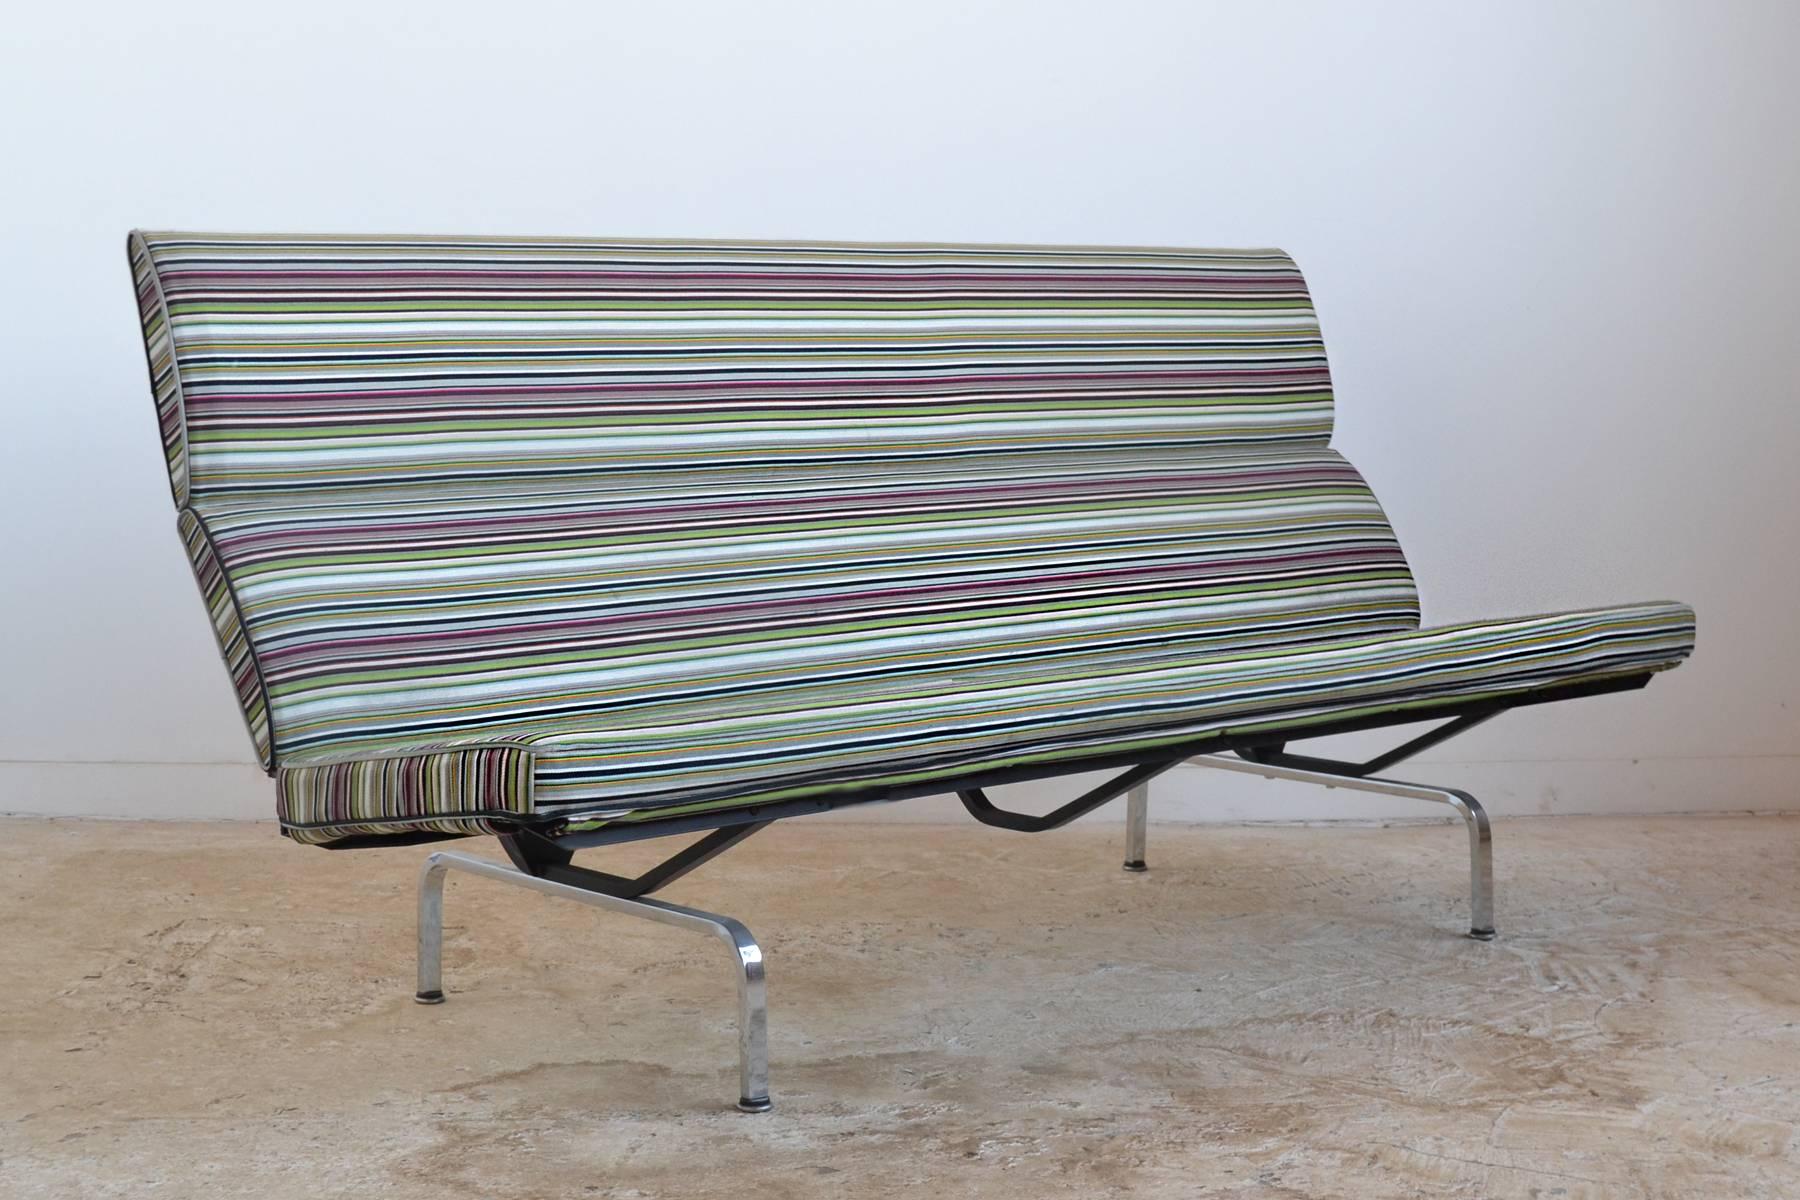 The Classic, clean-lined sofa design by Charles and Ray Eames upholstered in a wonderful Paul Smith striped fabric by Maharam.